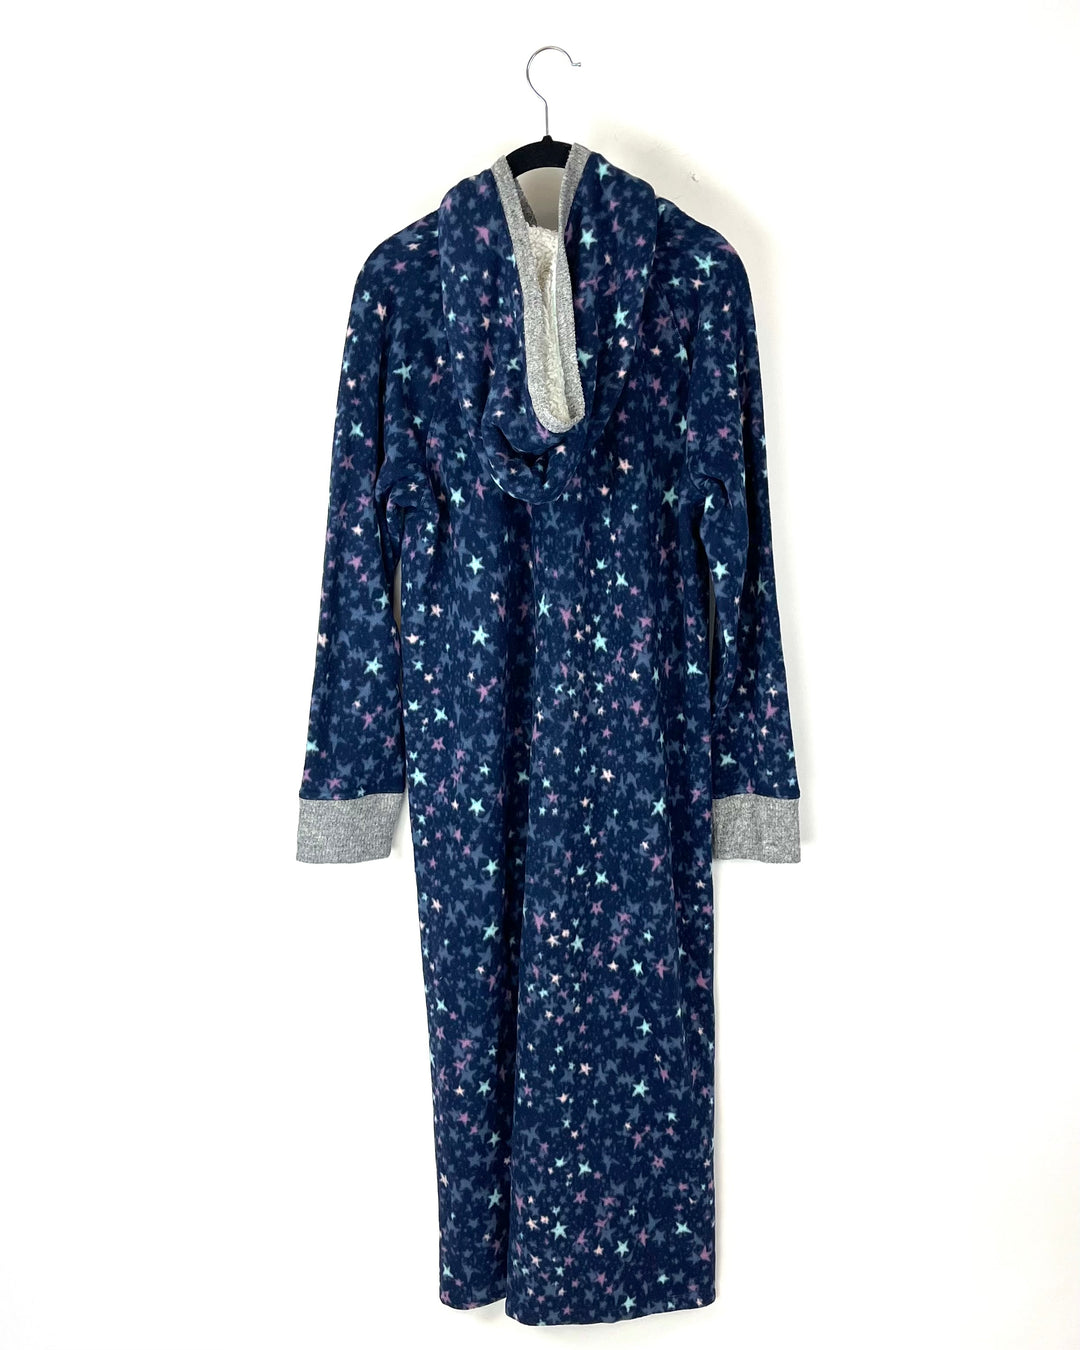 Cozy And Soft Nightgown - Small/Medium